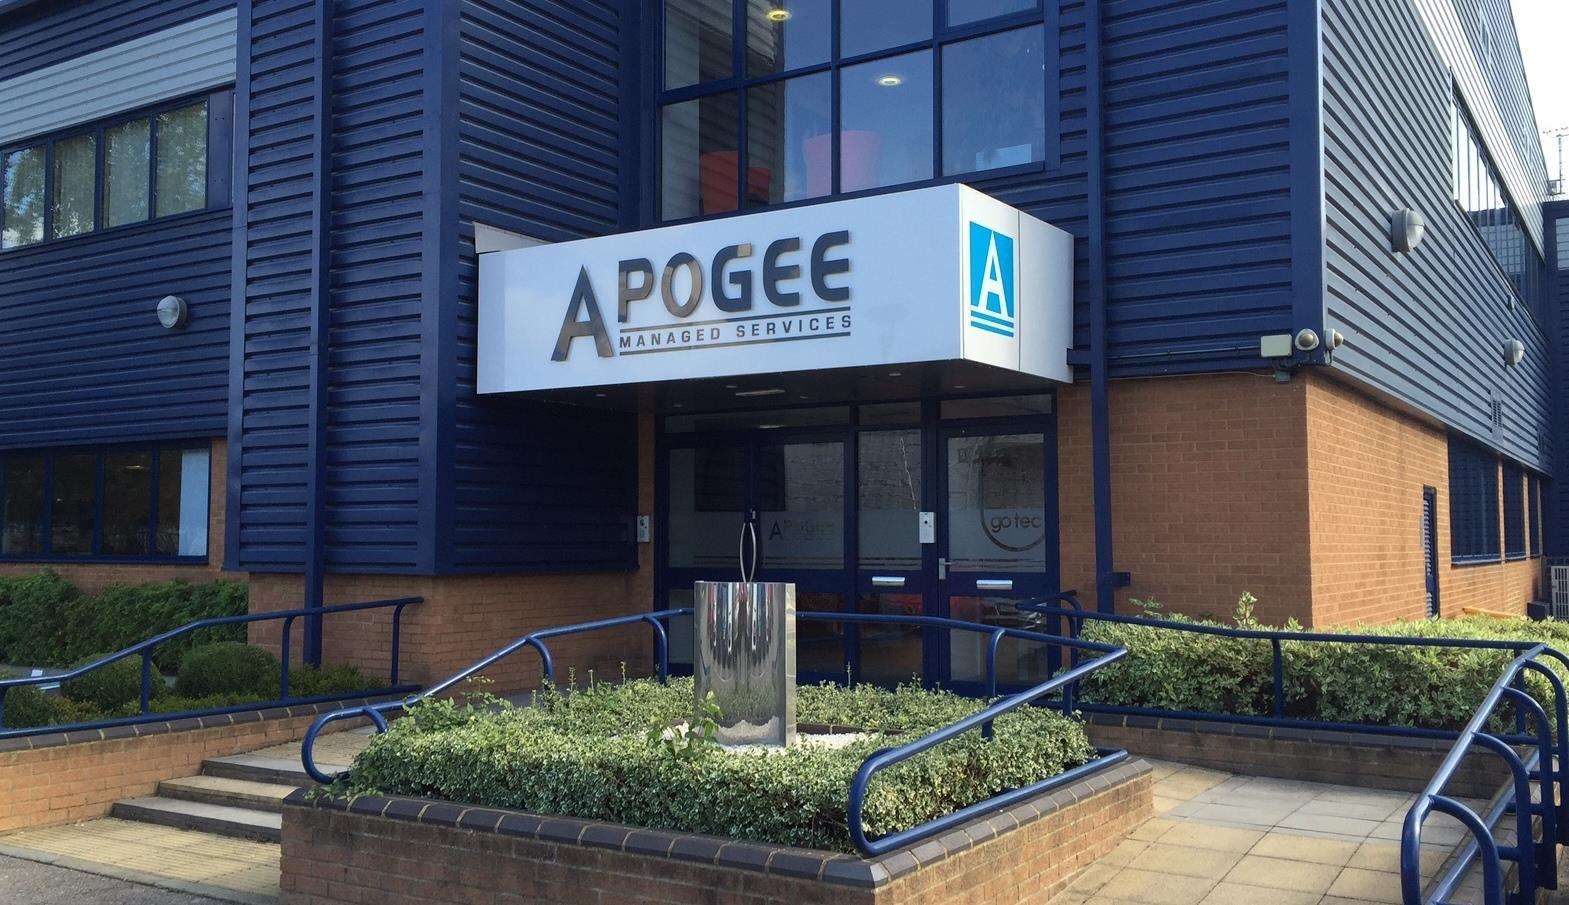 Printer business Apogee is based in Maidstone